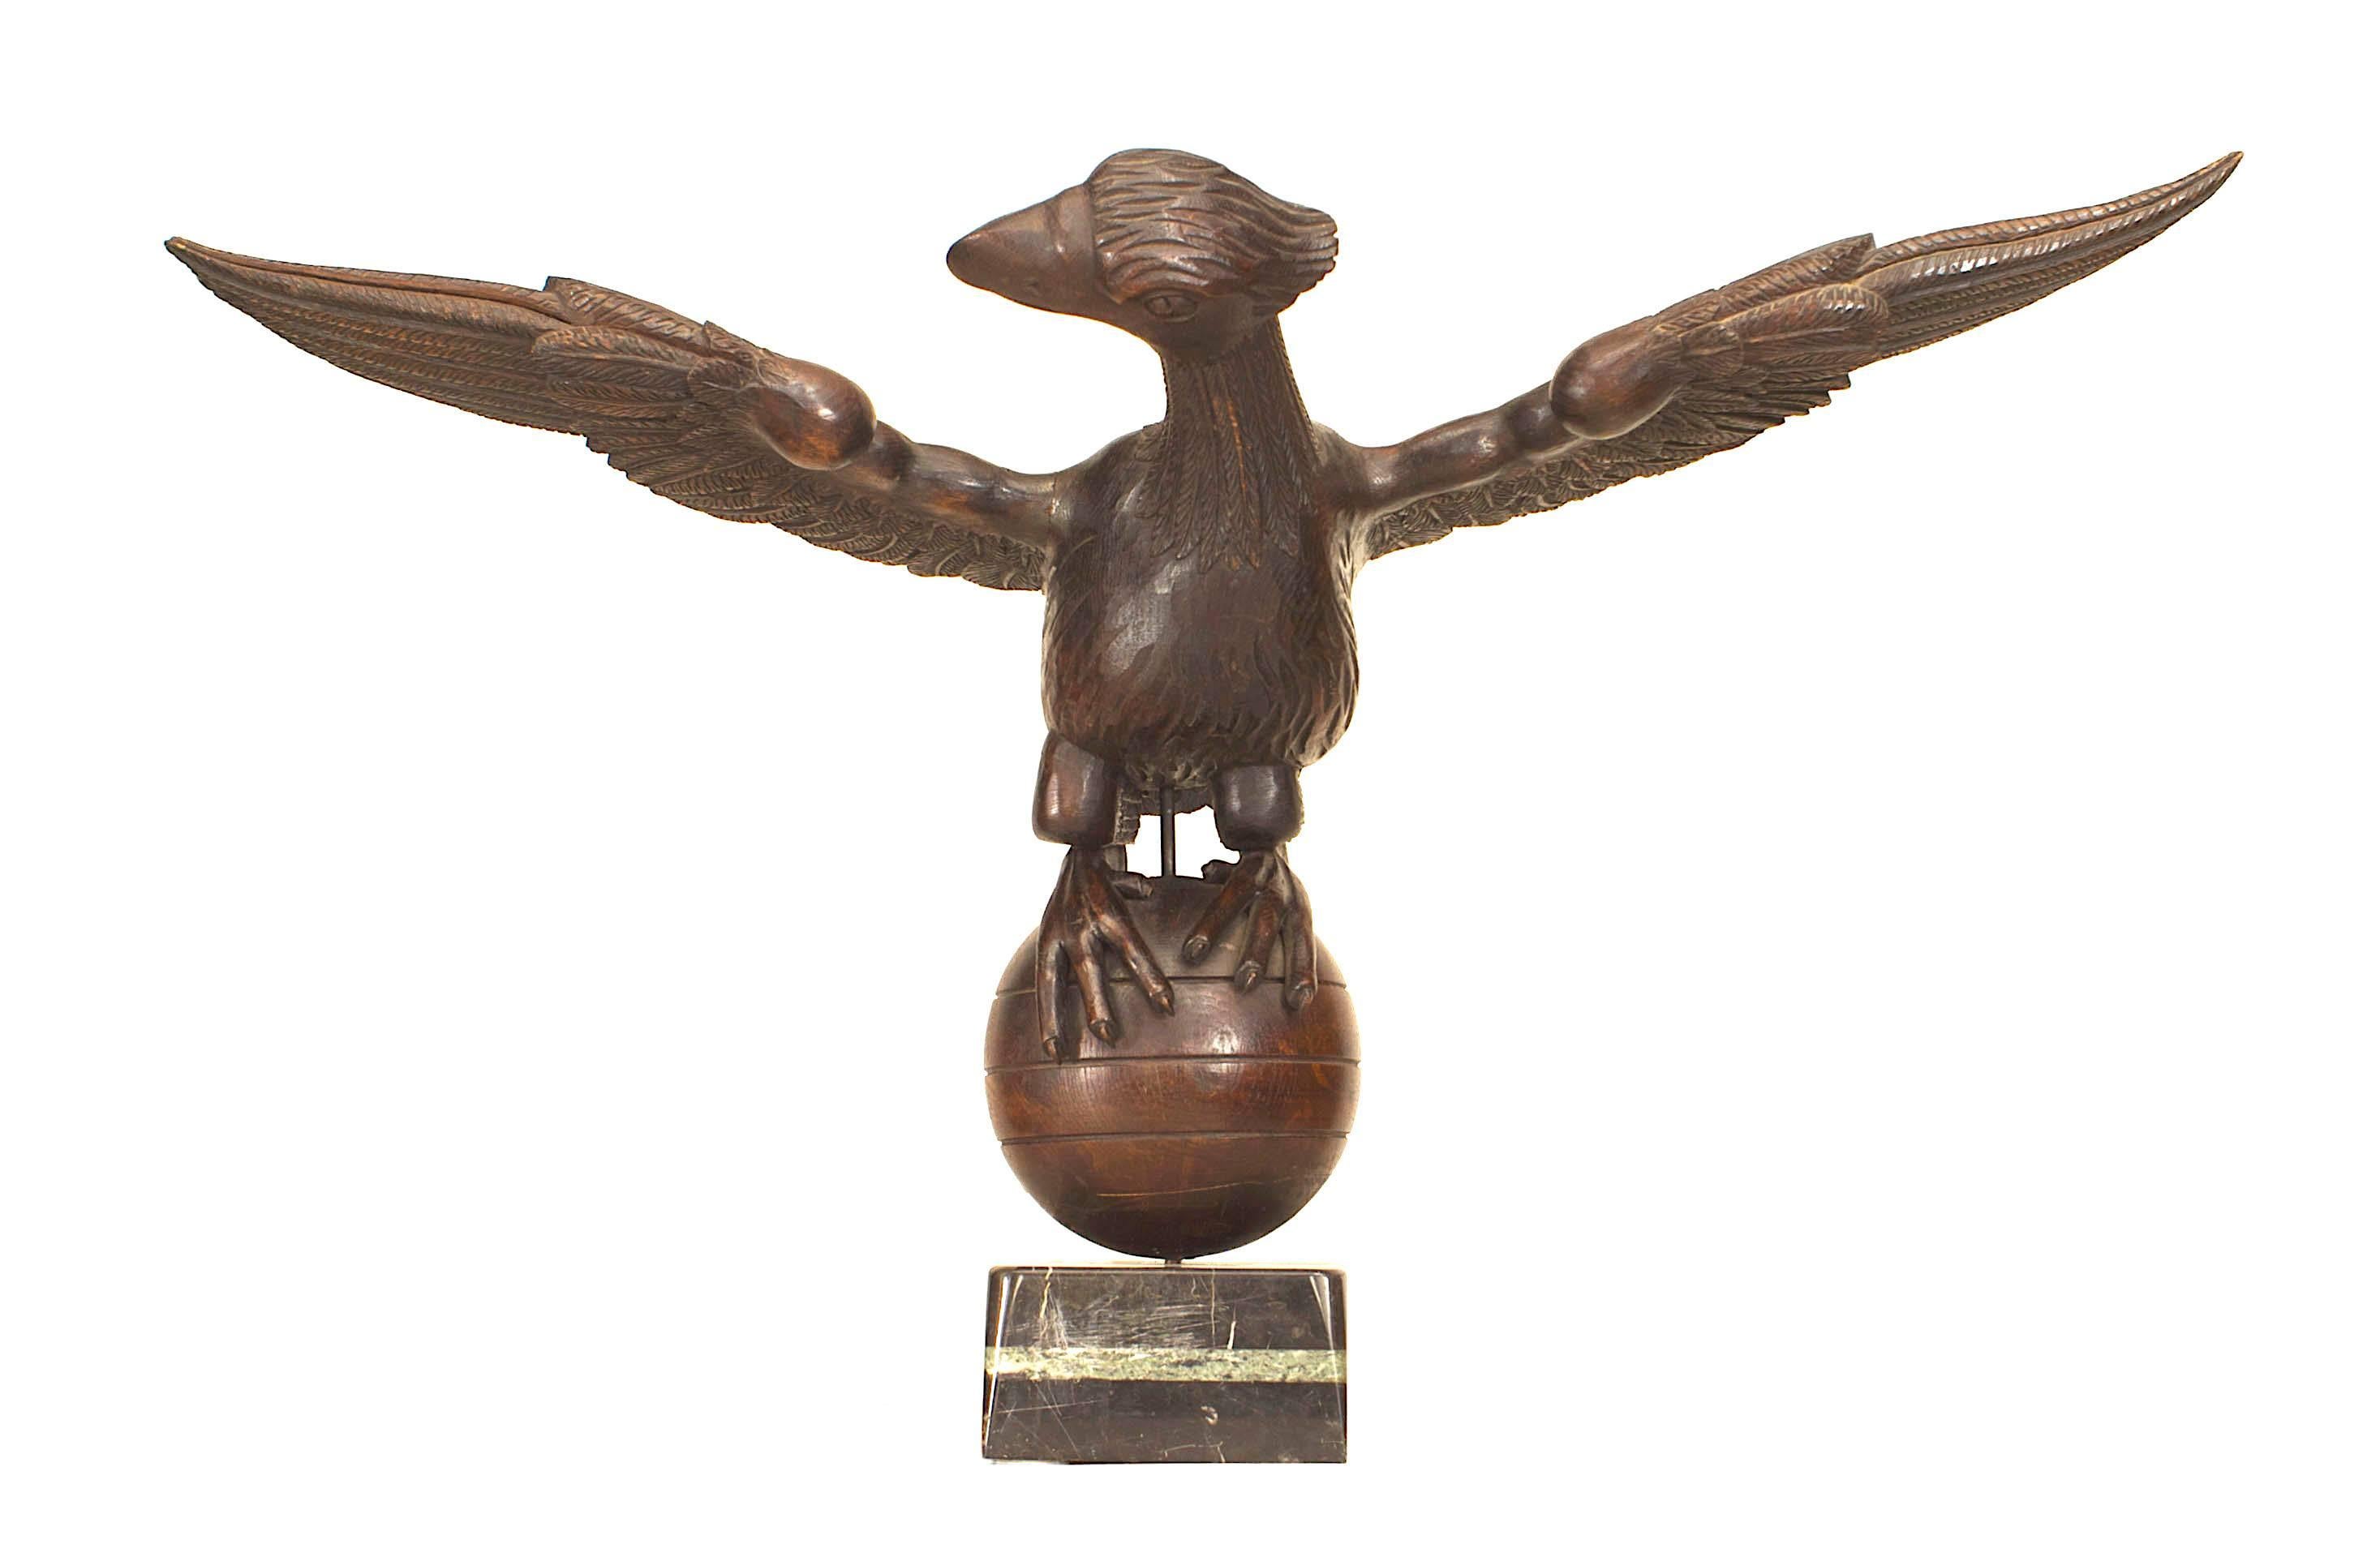 French (19th Cent Napoleonic Era) folk art carved oak life size figure of an eagle with out stretched wings perched on a round globe with a marble base.
    